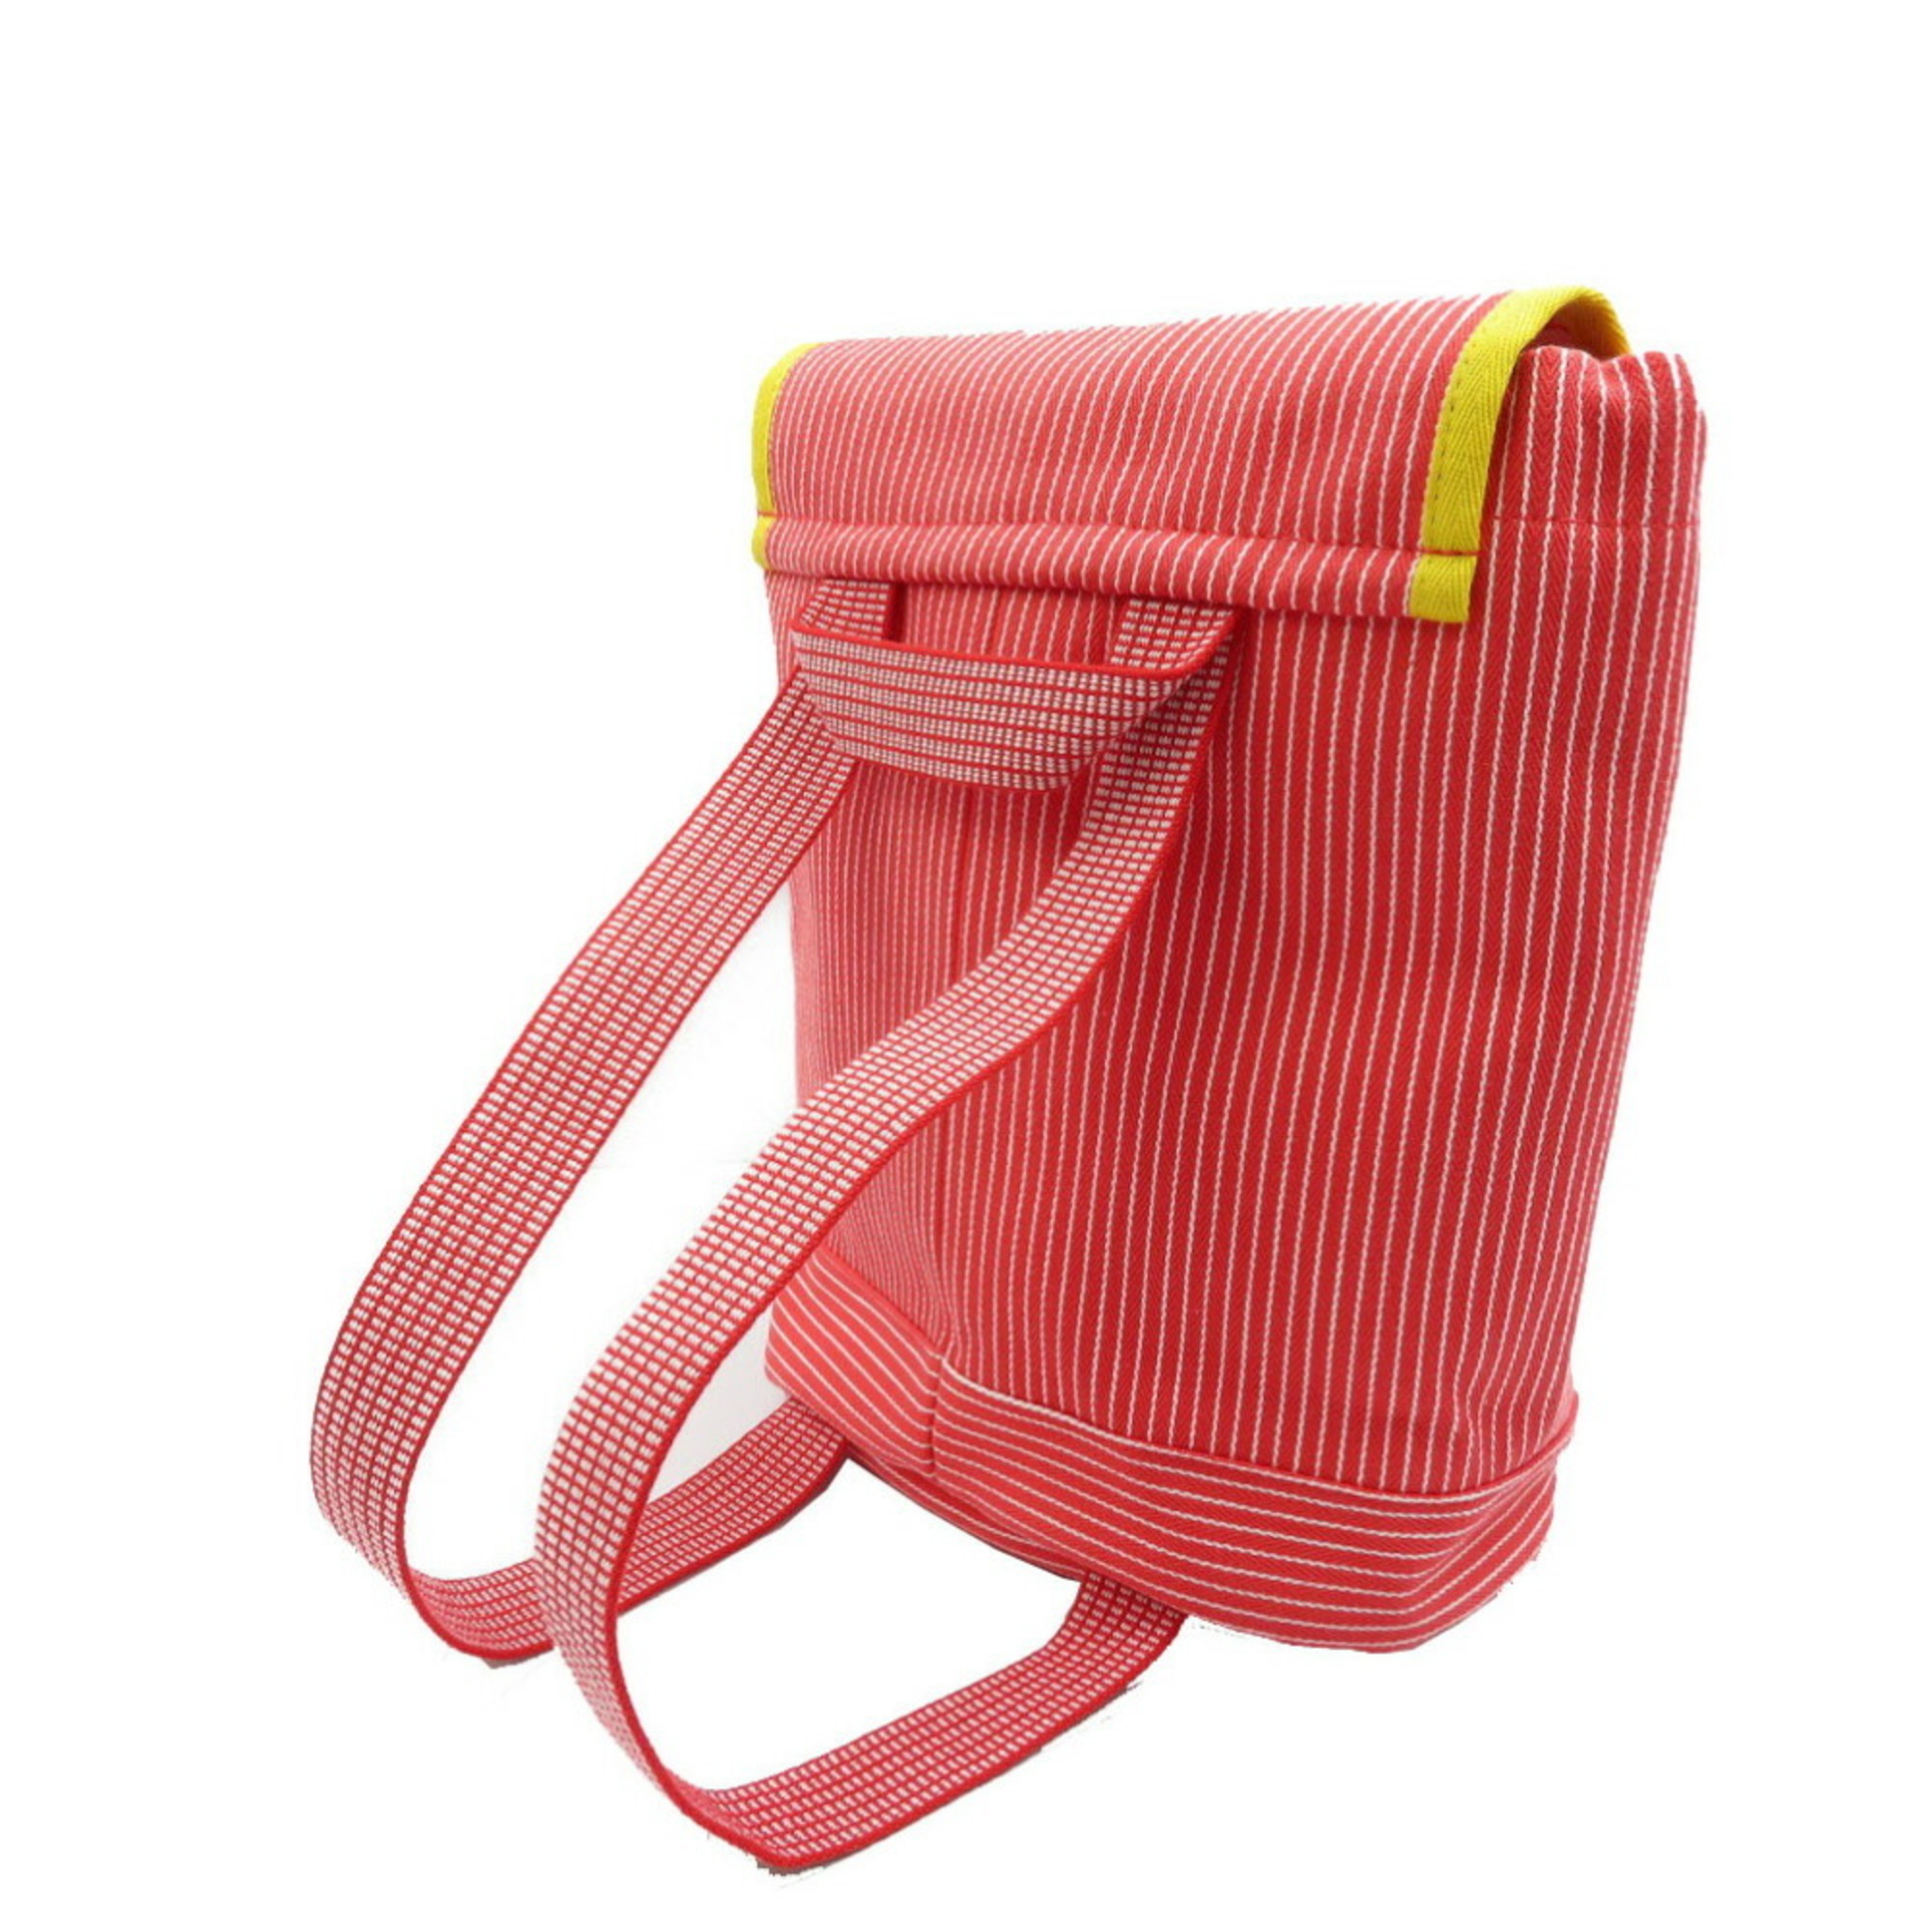 Hermes Kids Horse Stripe Caval Color Cotton Red Yellow Rucksack Backpack